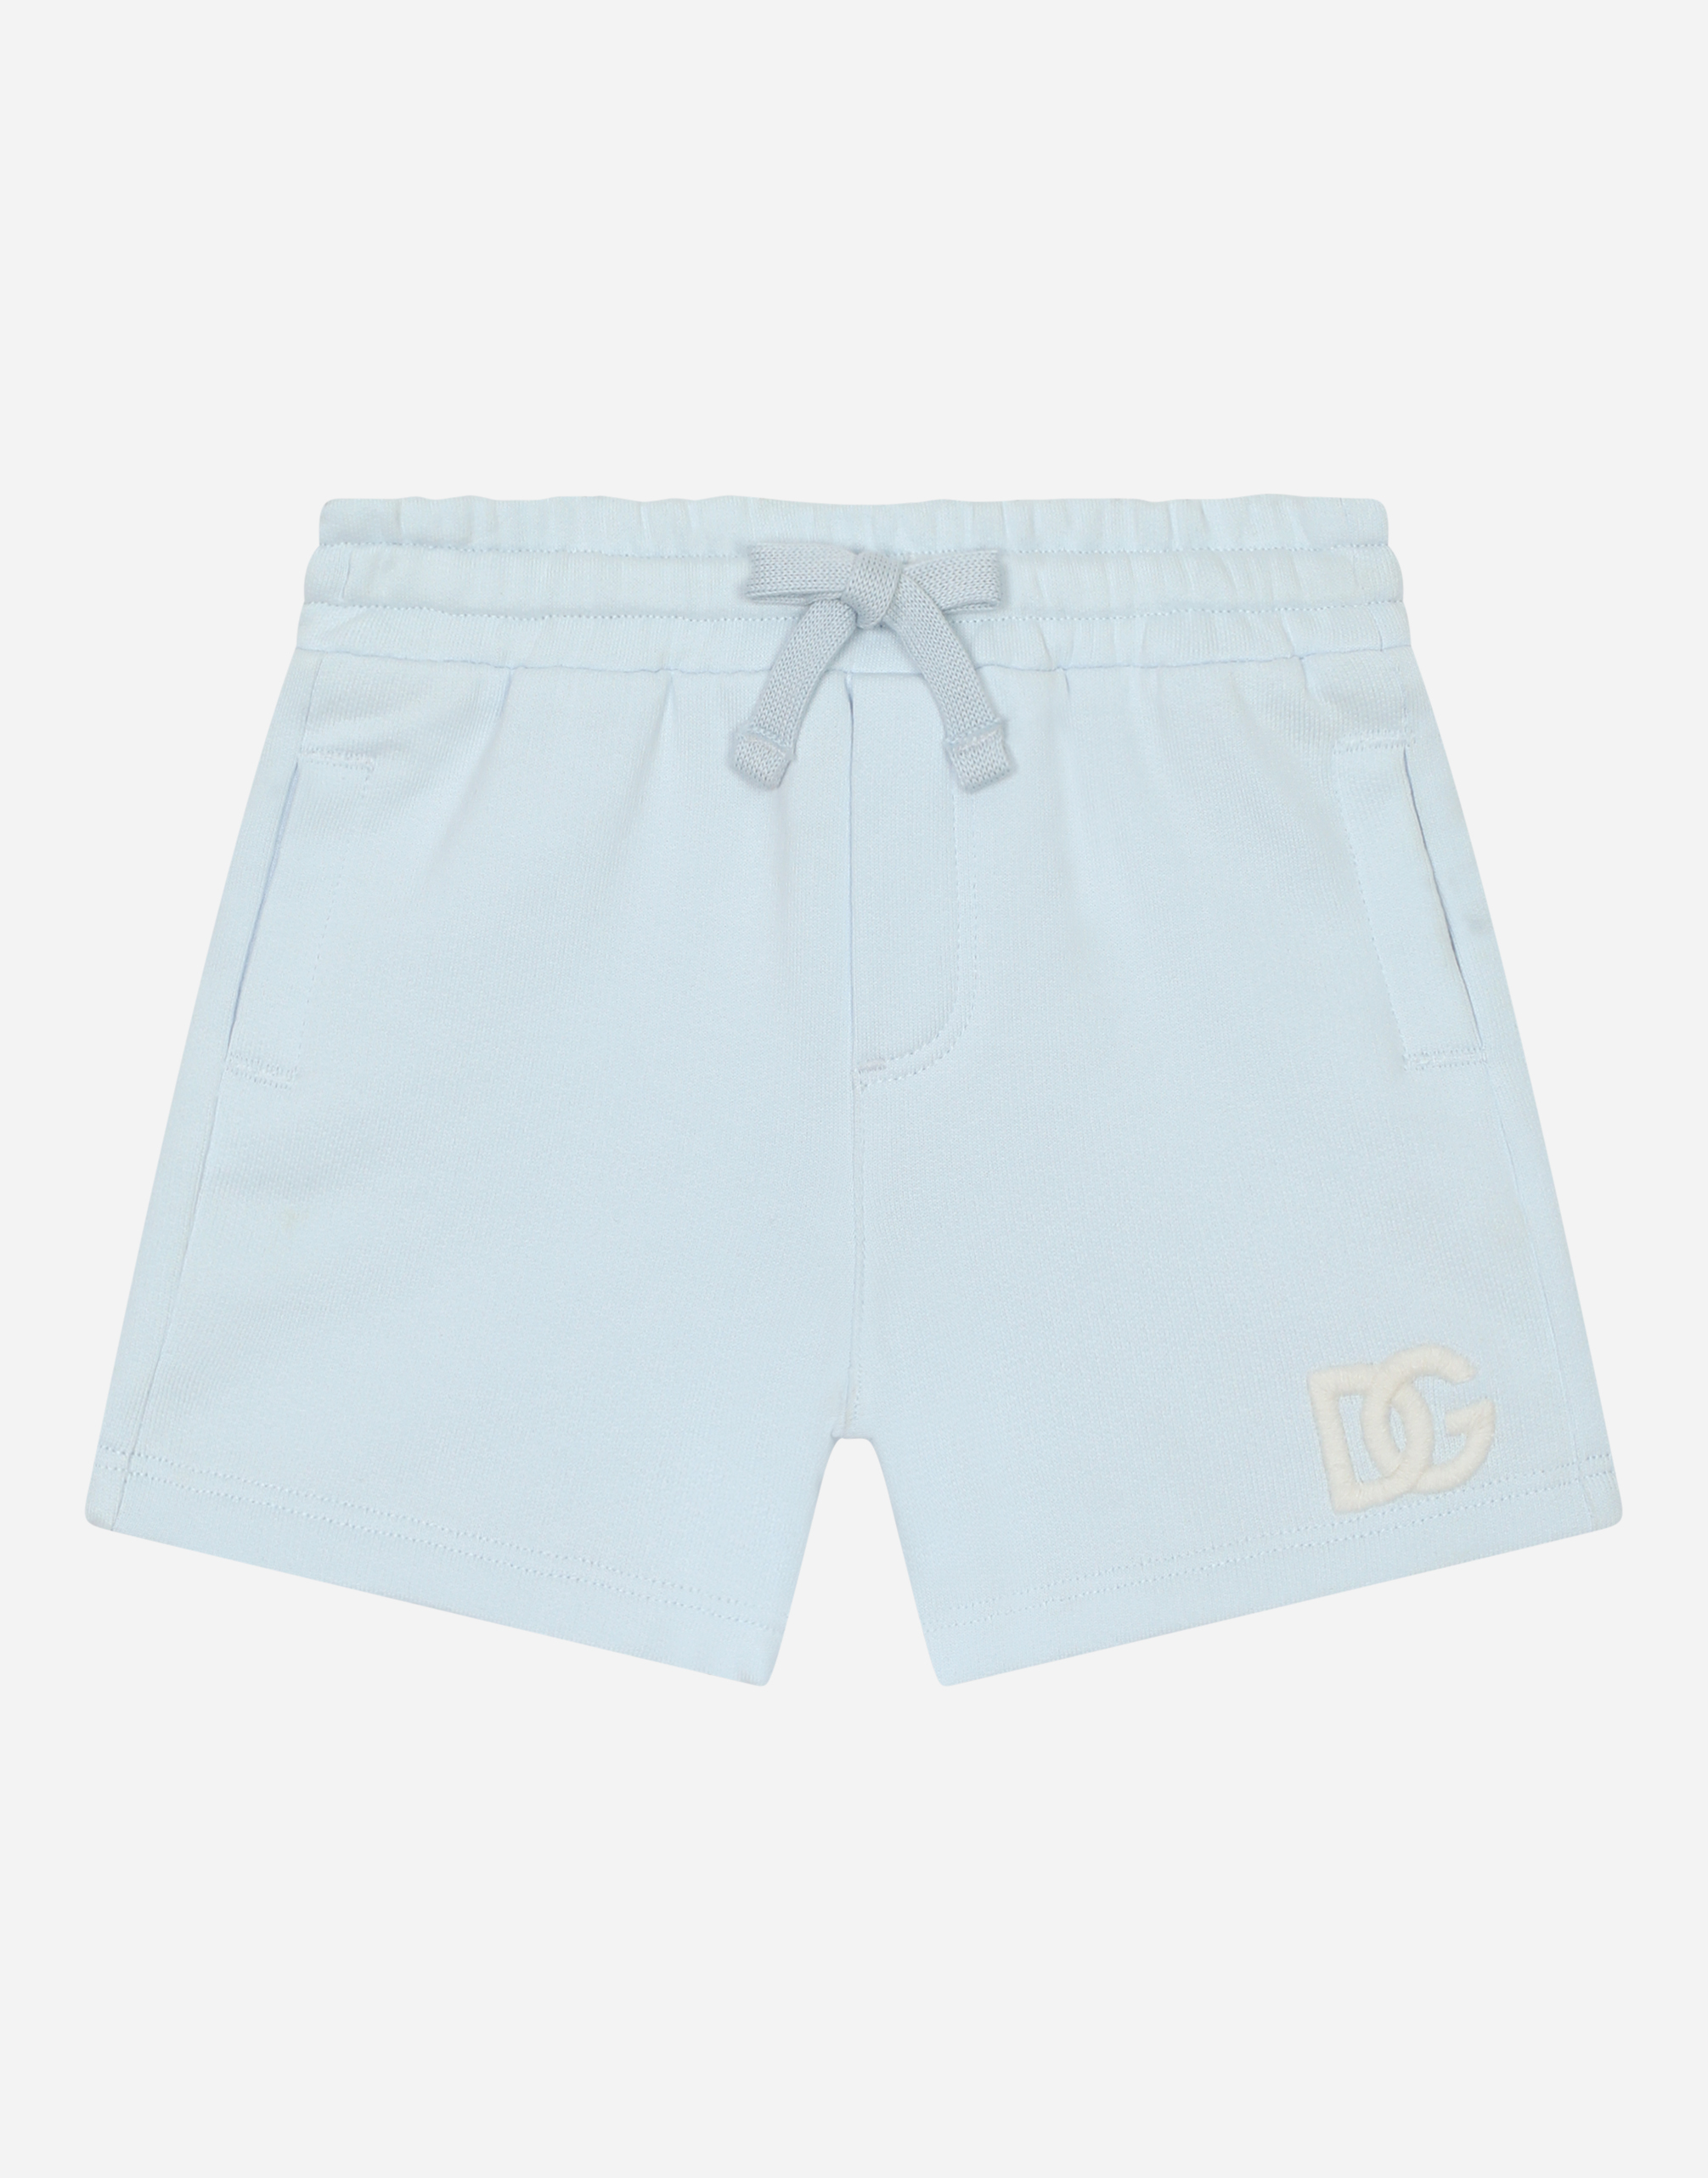 Jersey jogging shorts with DG logo embroidery in Grey